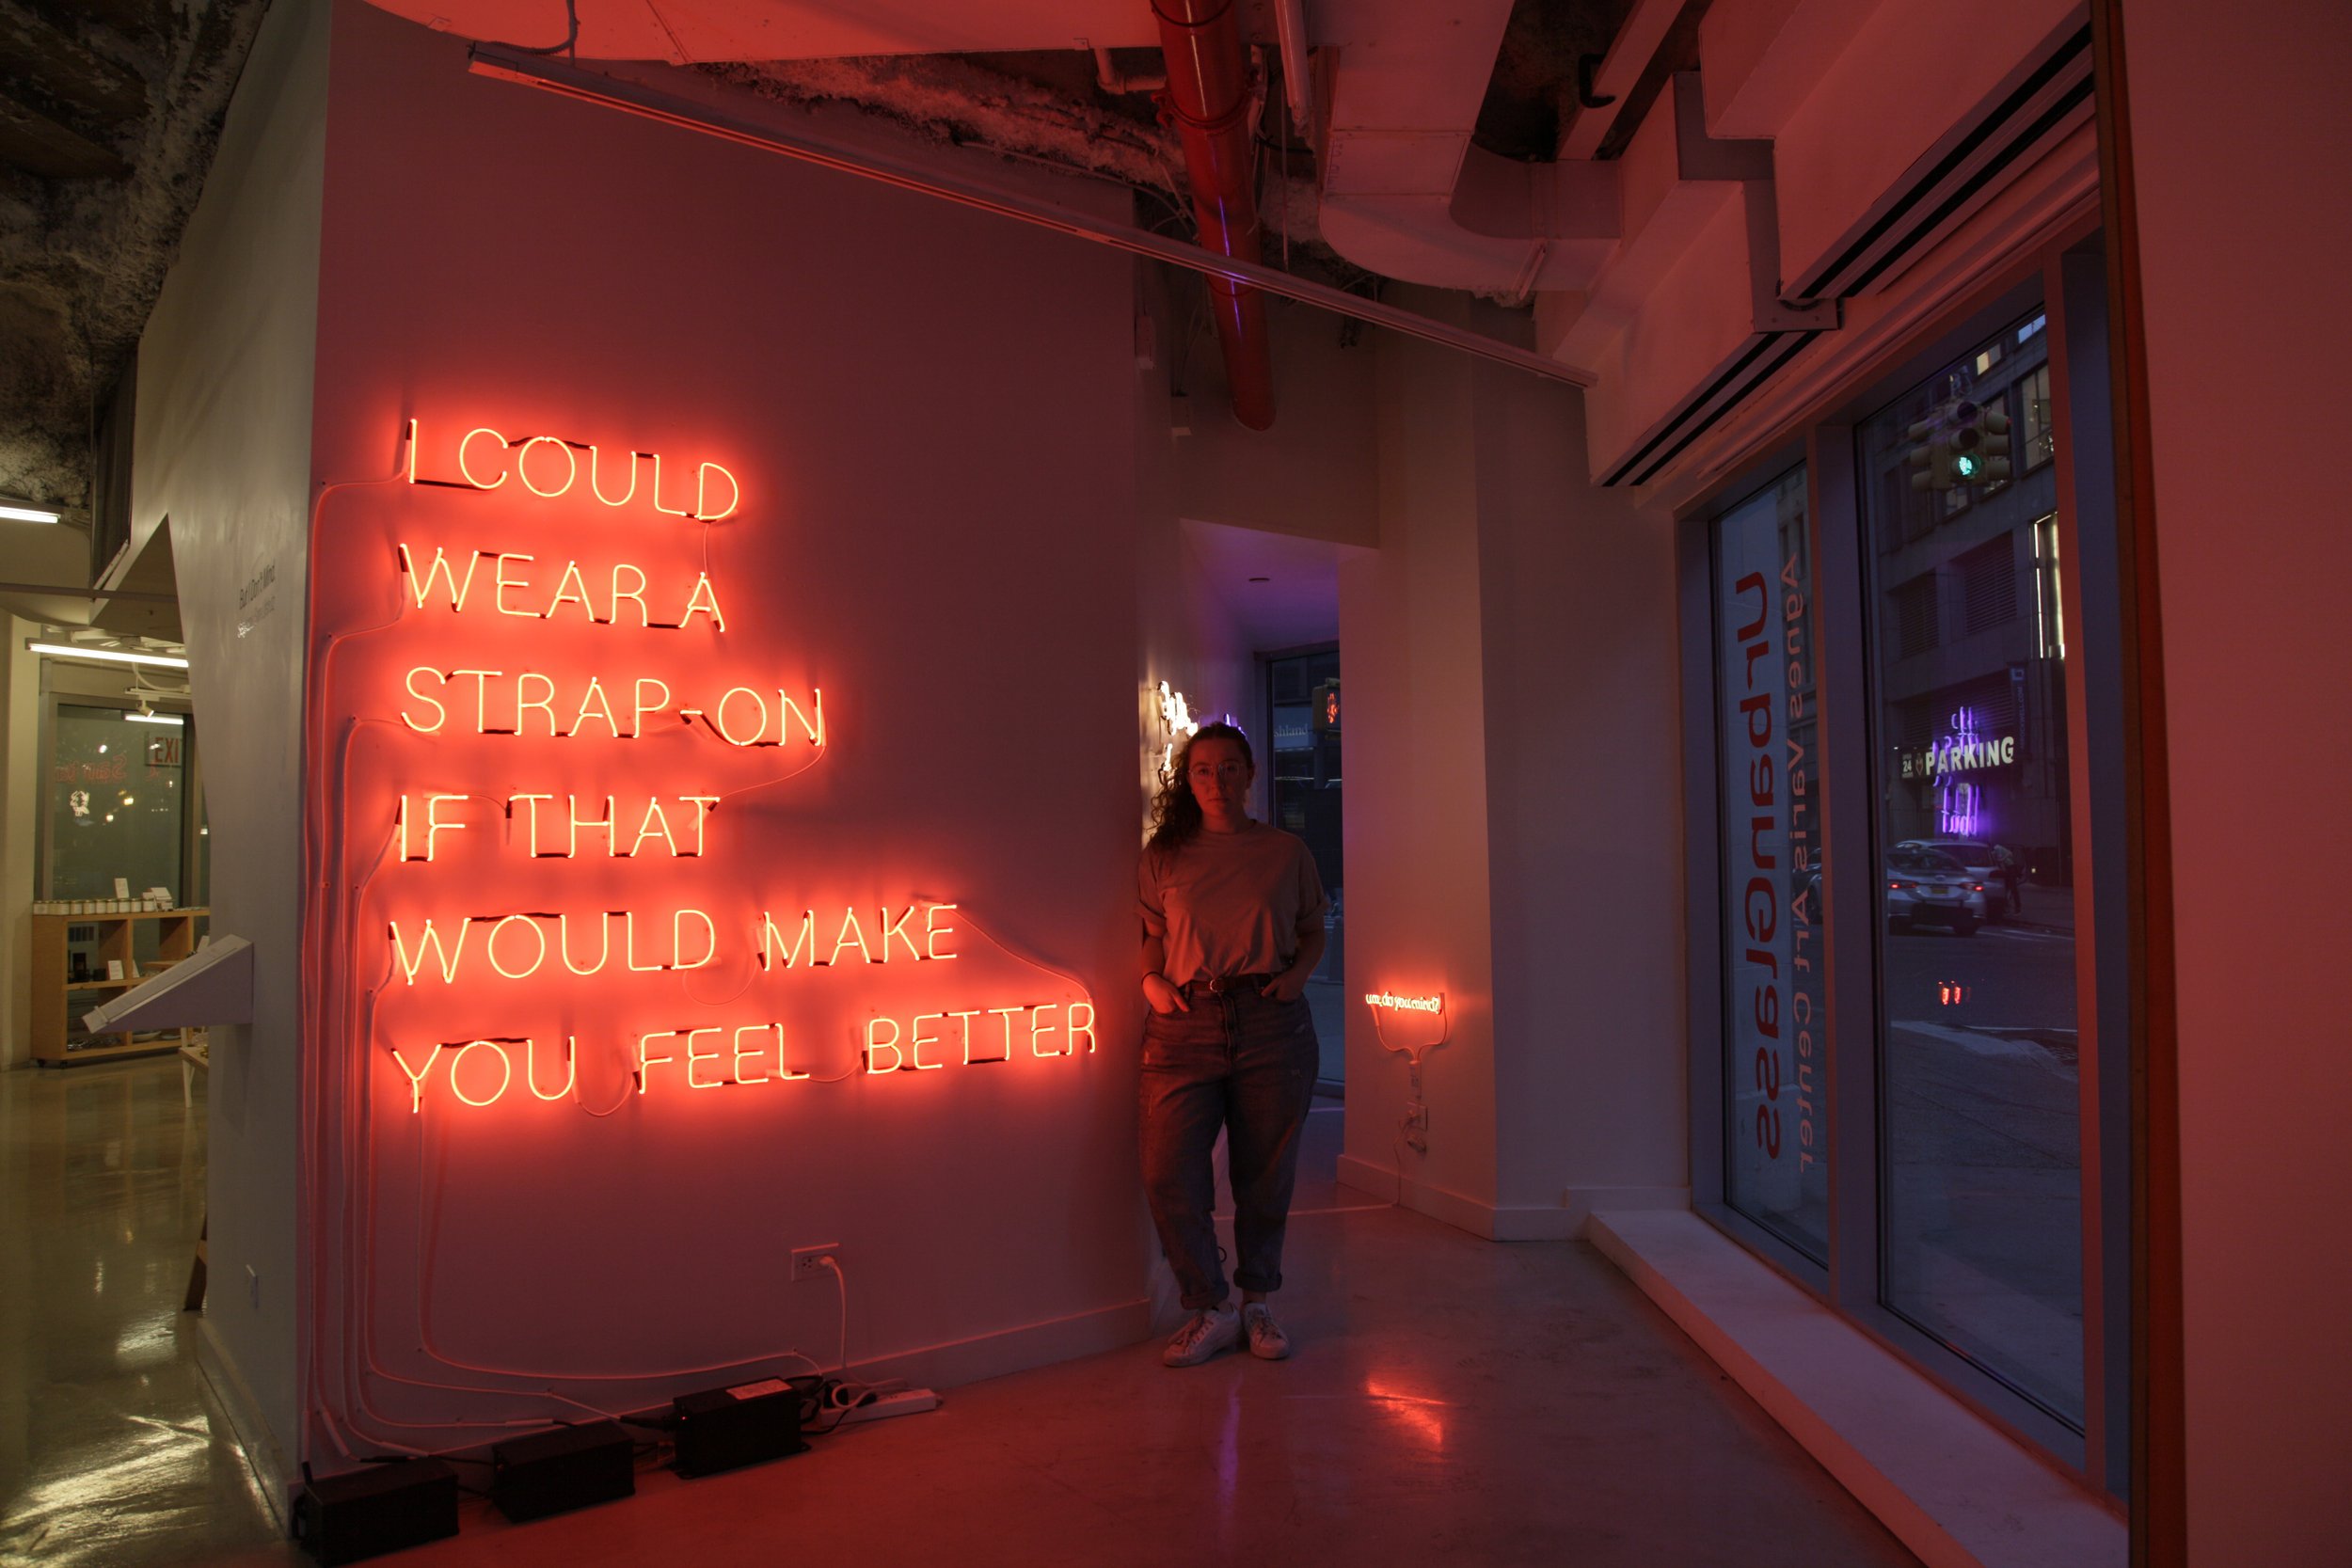  Installation view of  But I Don’t Mind.   UrbanGlass, 2020 